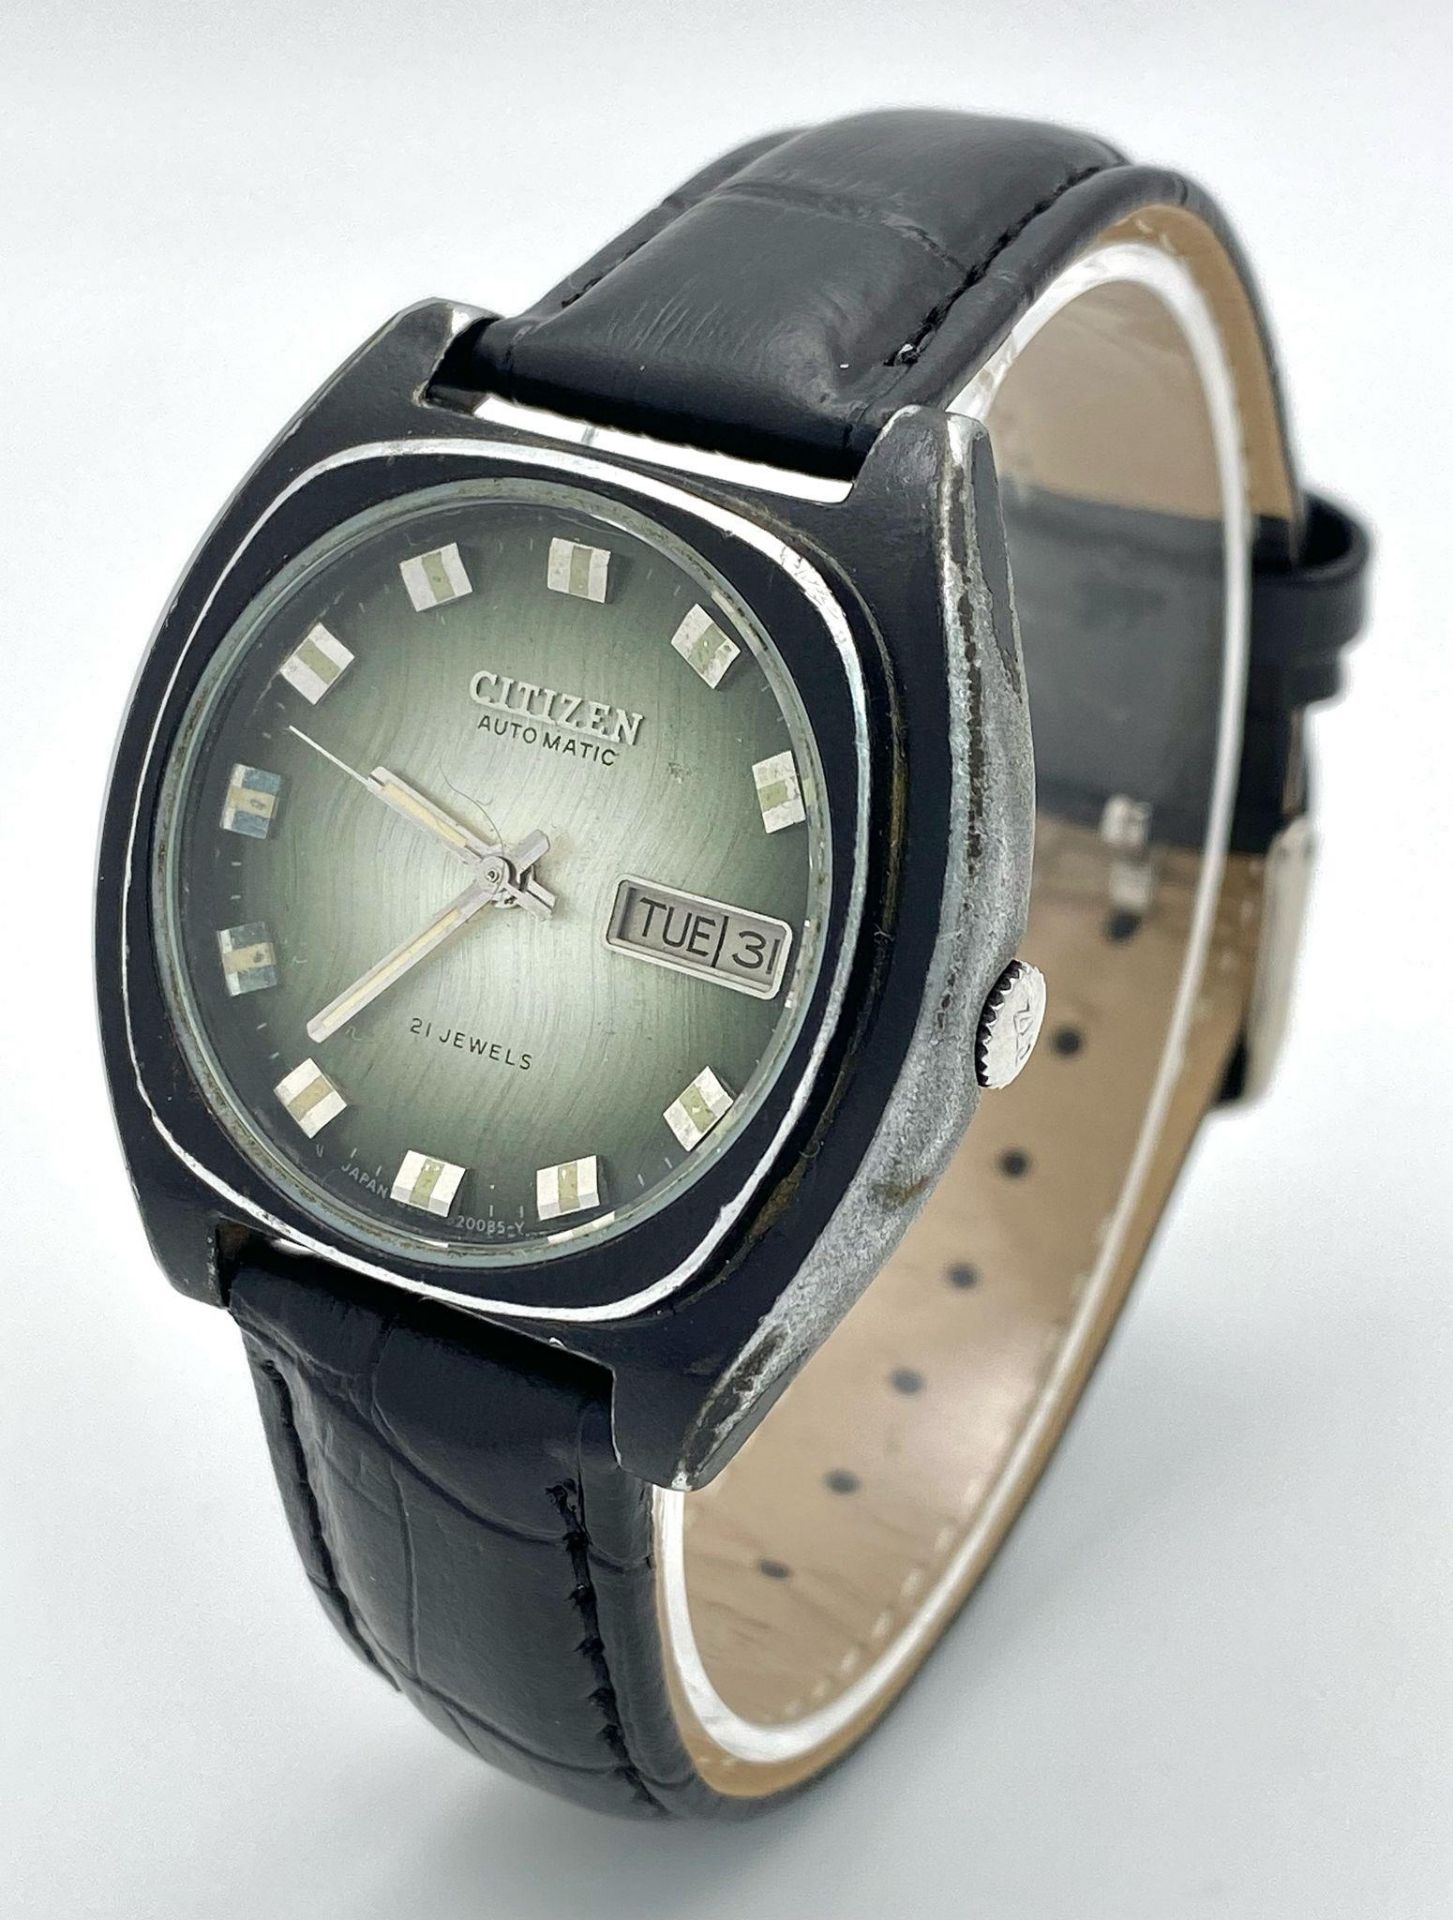 A Vintage Citizen 21 Jewels Automatic Gents Watch. Black leather strap. Black stainless steel case -